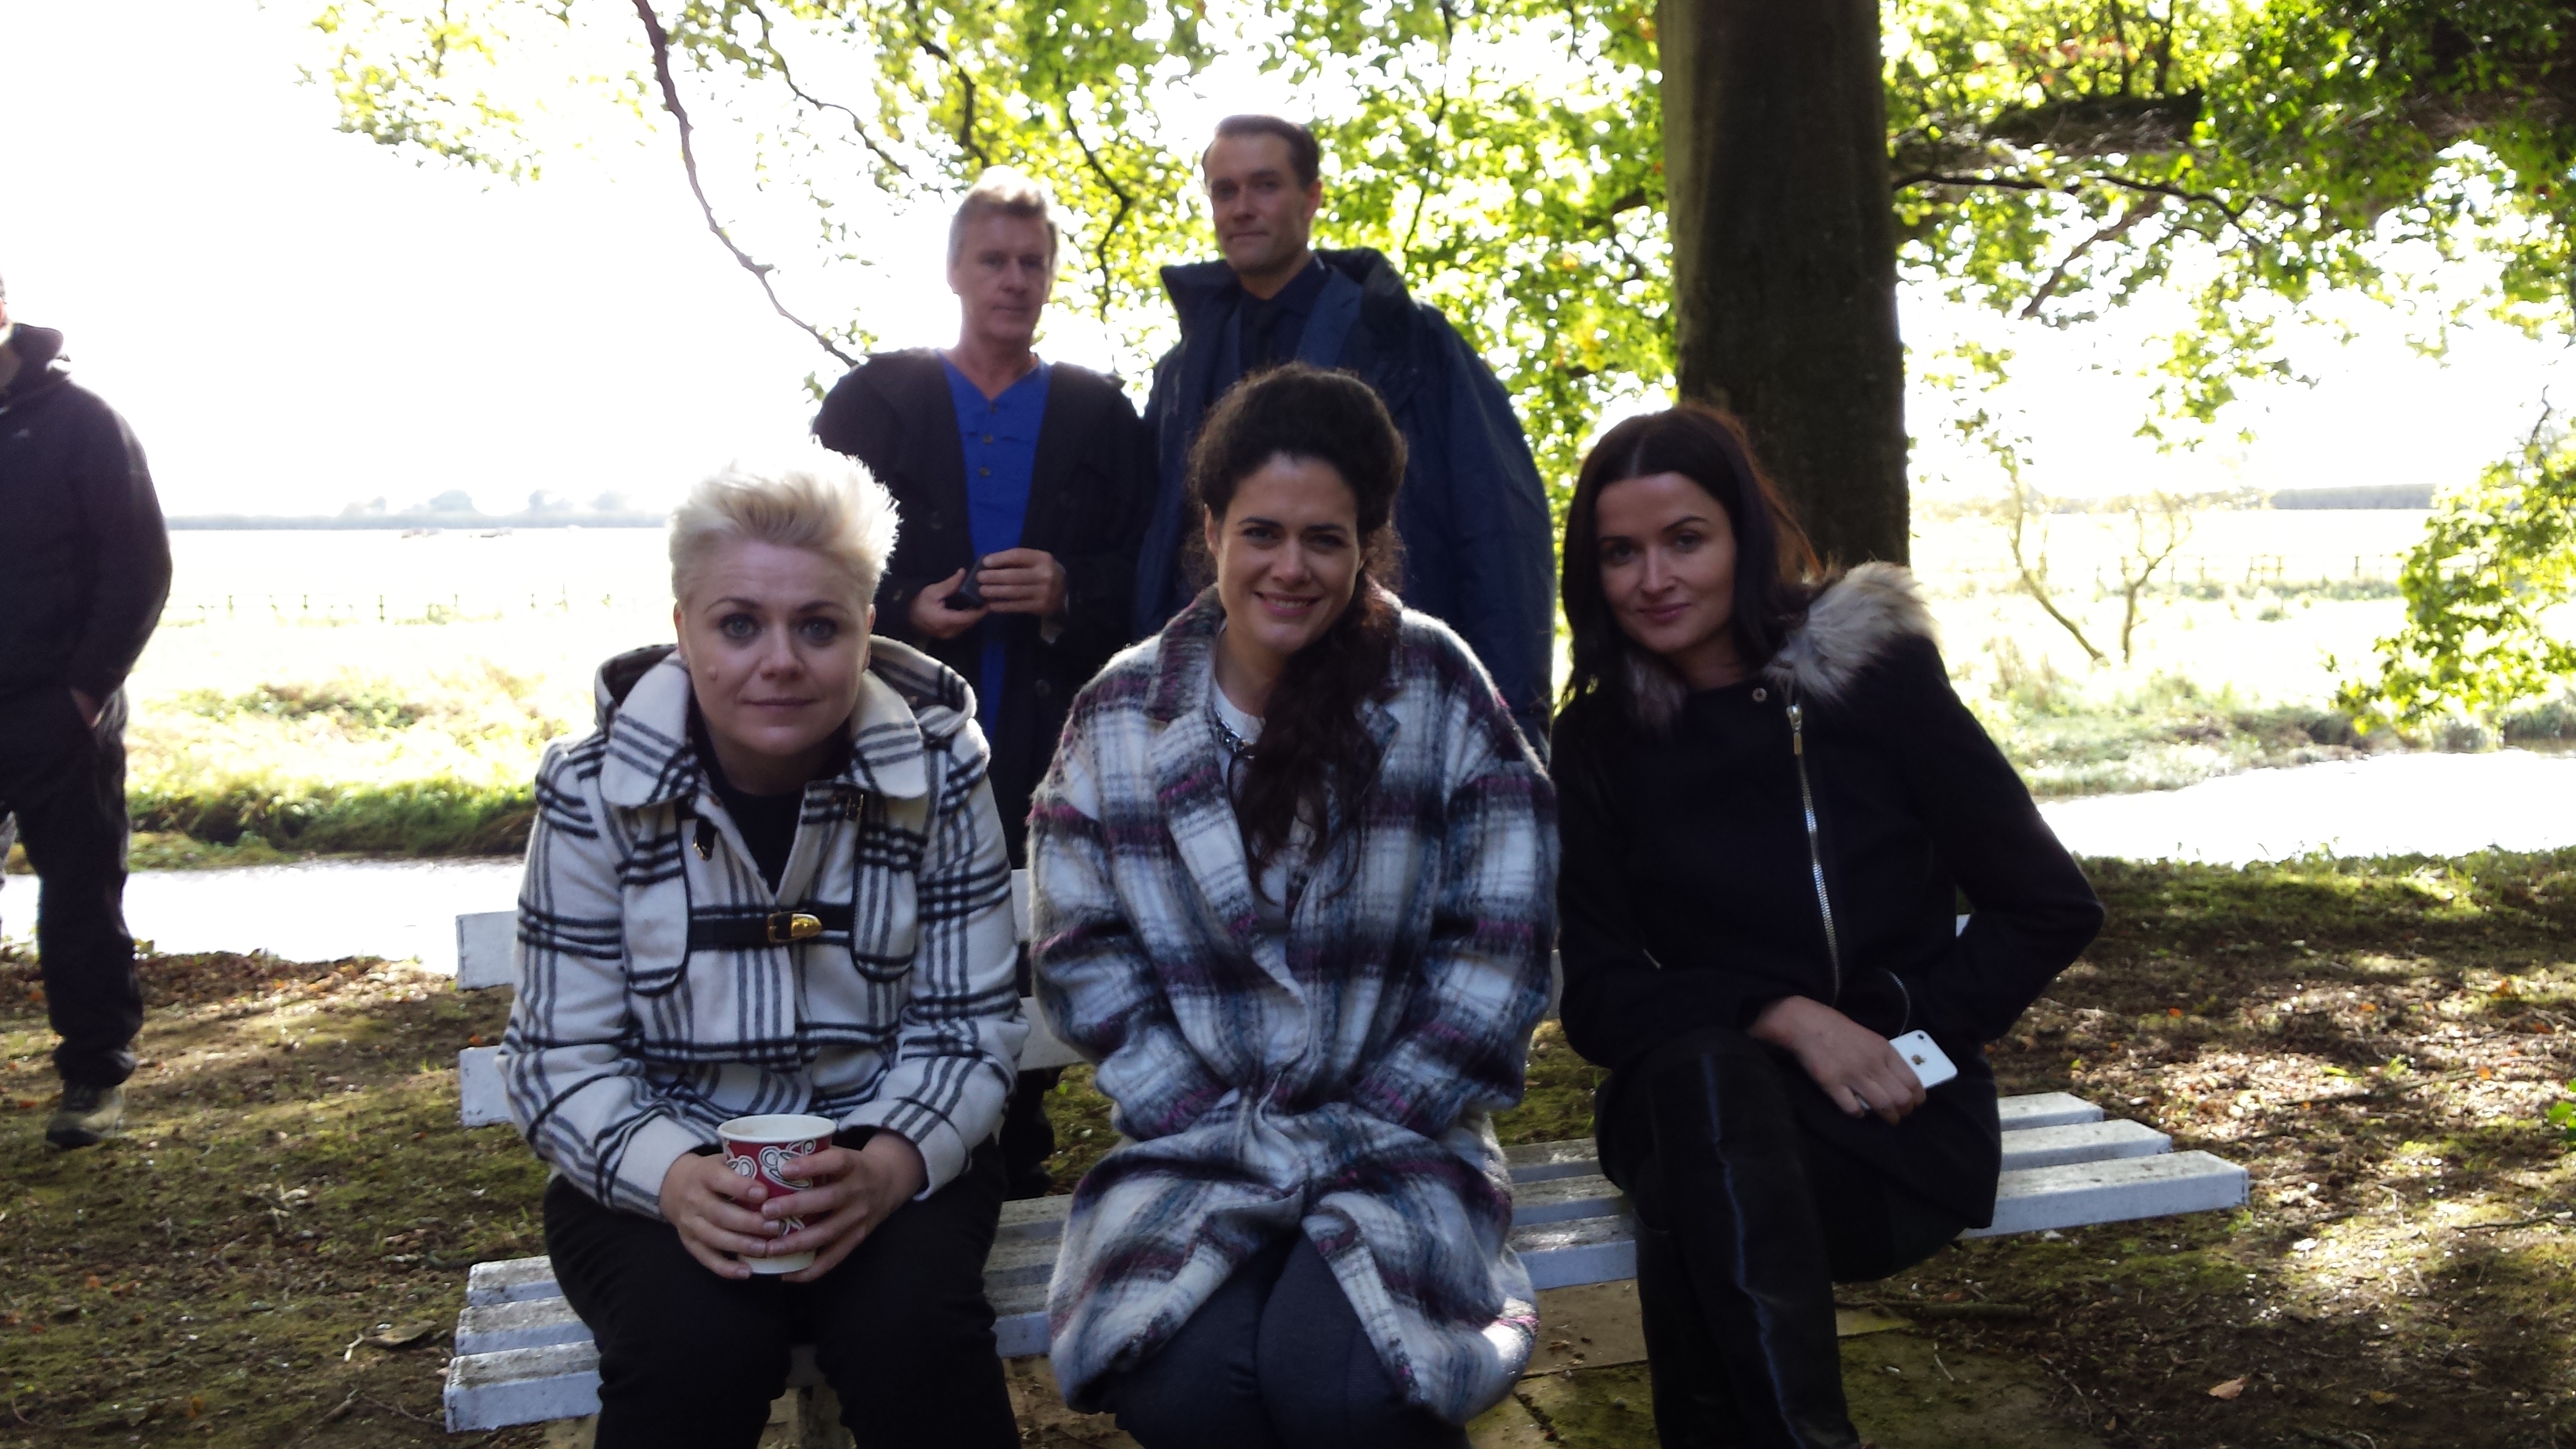 Norah King on location filming the Gaelic Curse (2016) with Liz O'Sullivan (L), Lynette Callaghan (R), Brian Walsh (Writer / Producer) and Adam Goodwin (behind).